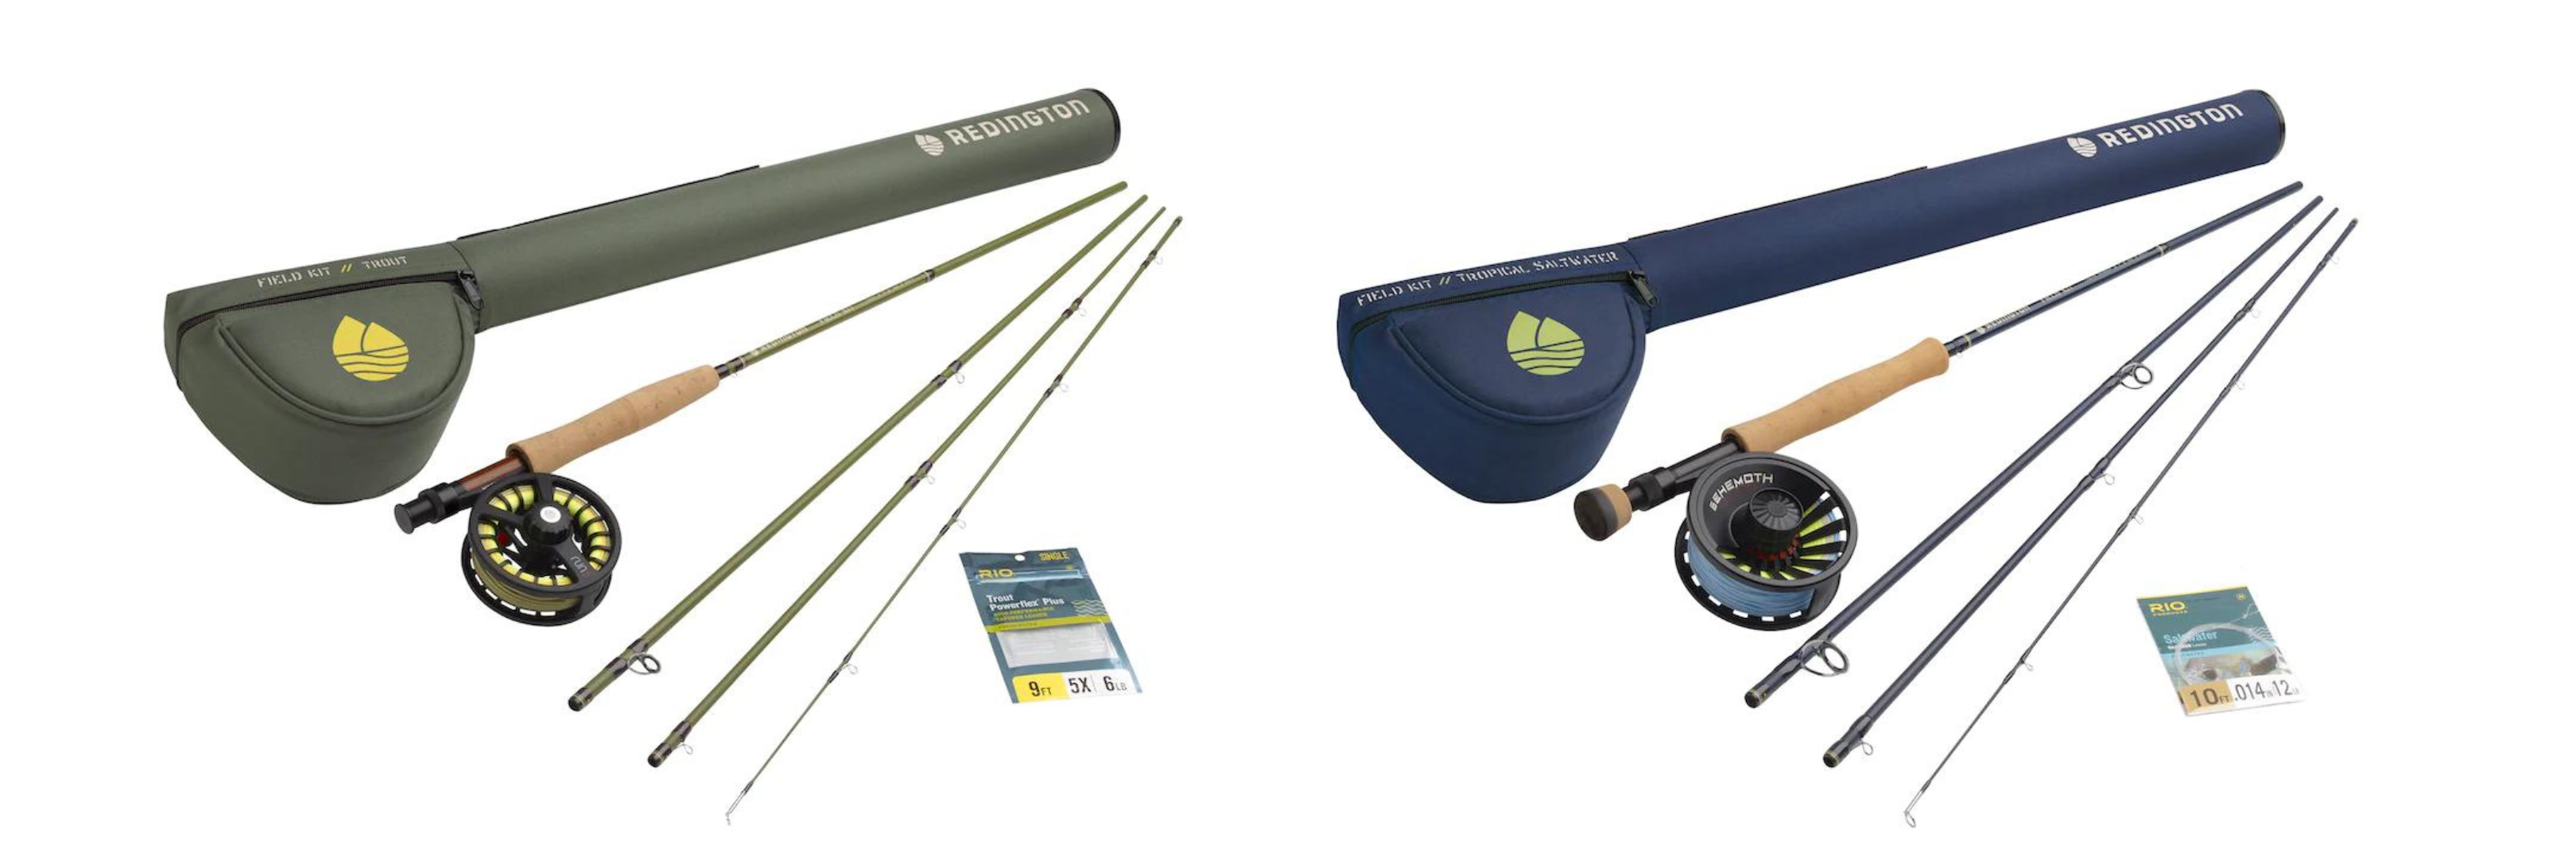 Fly Fishing Combo Both Freshwater Fishing Rod & Reel Combos for